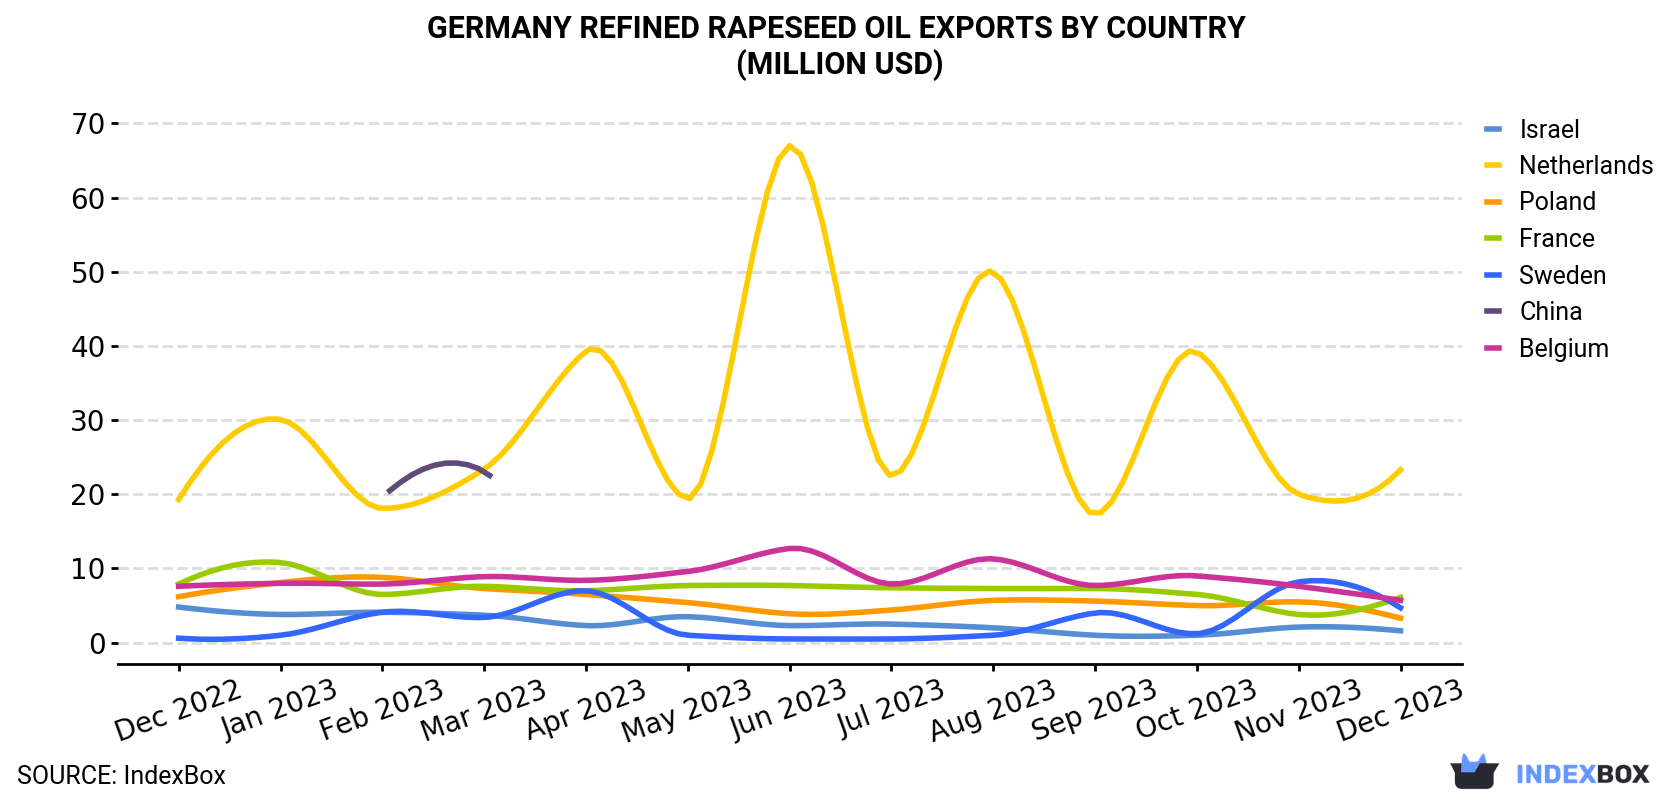 Germany Refined Rapeseed Oil Exports By Country (Million USD)